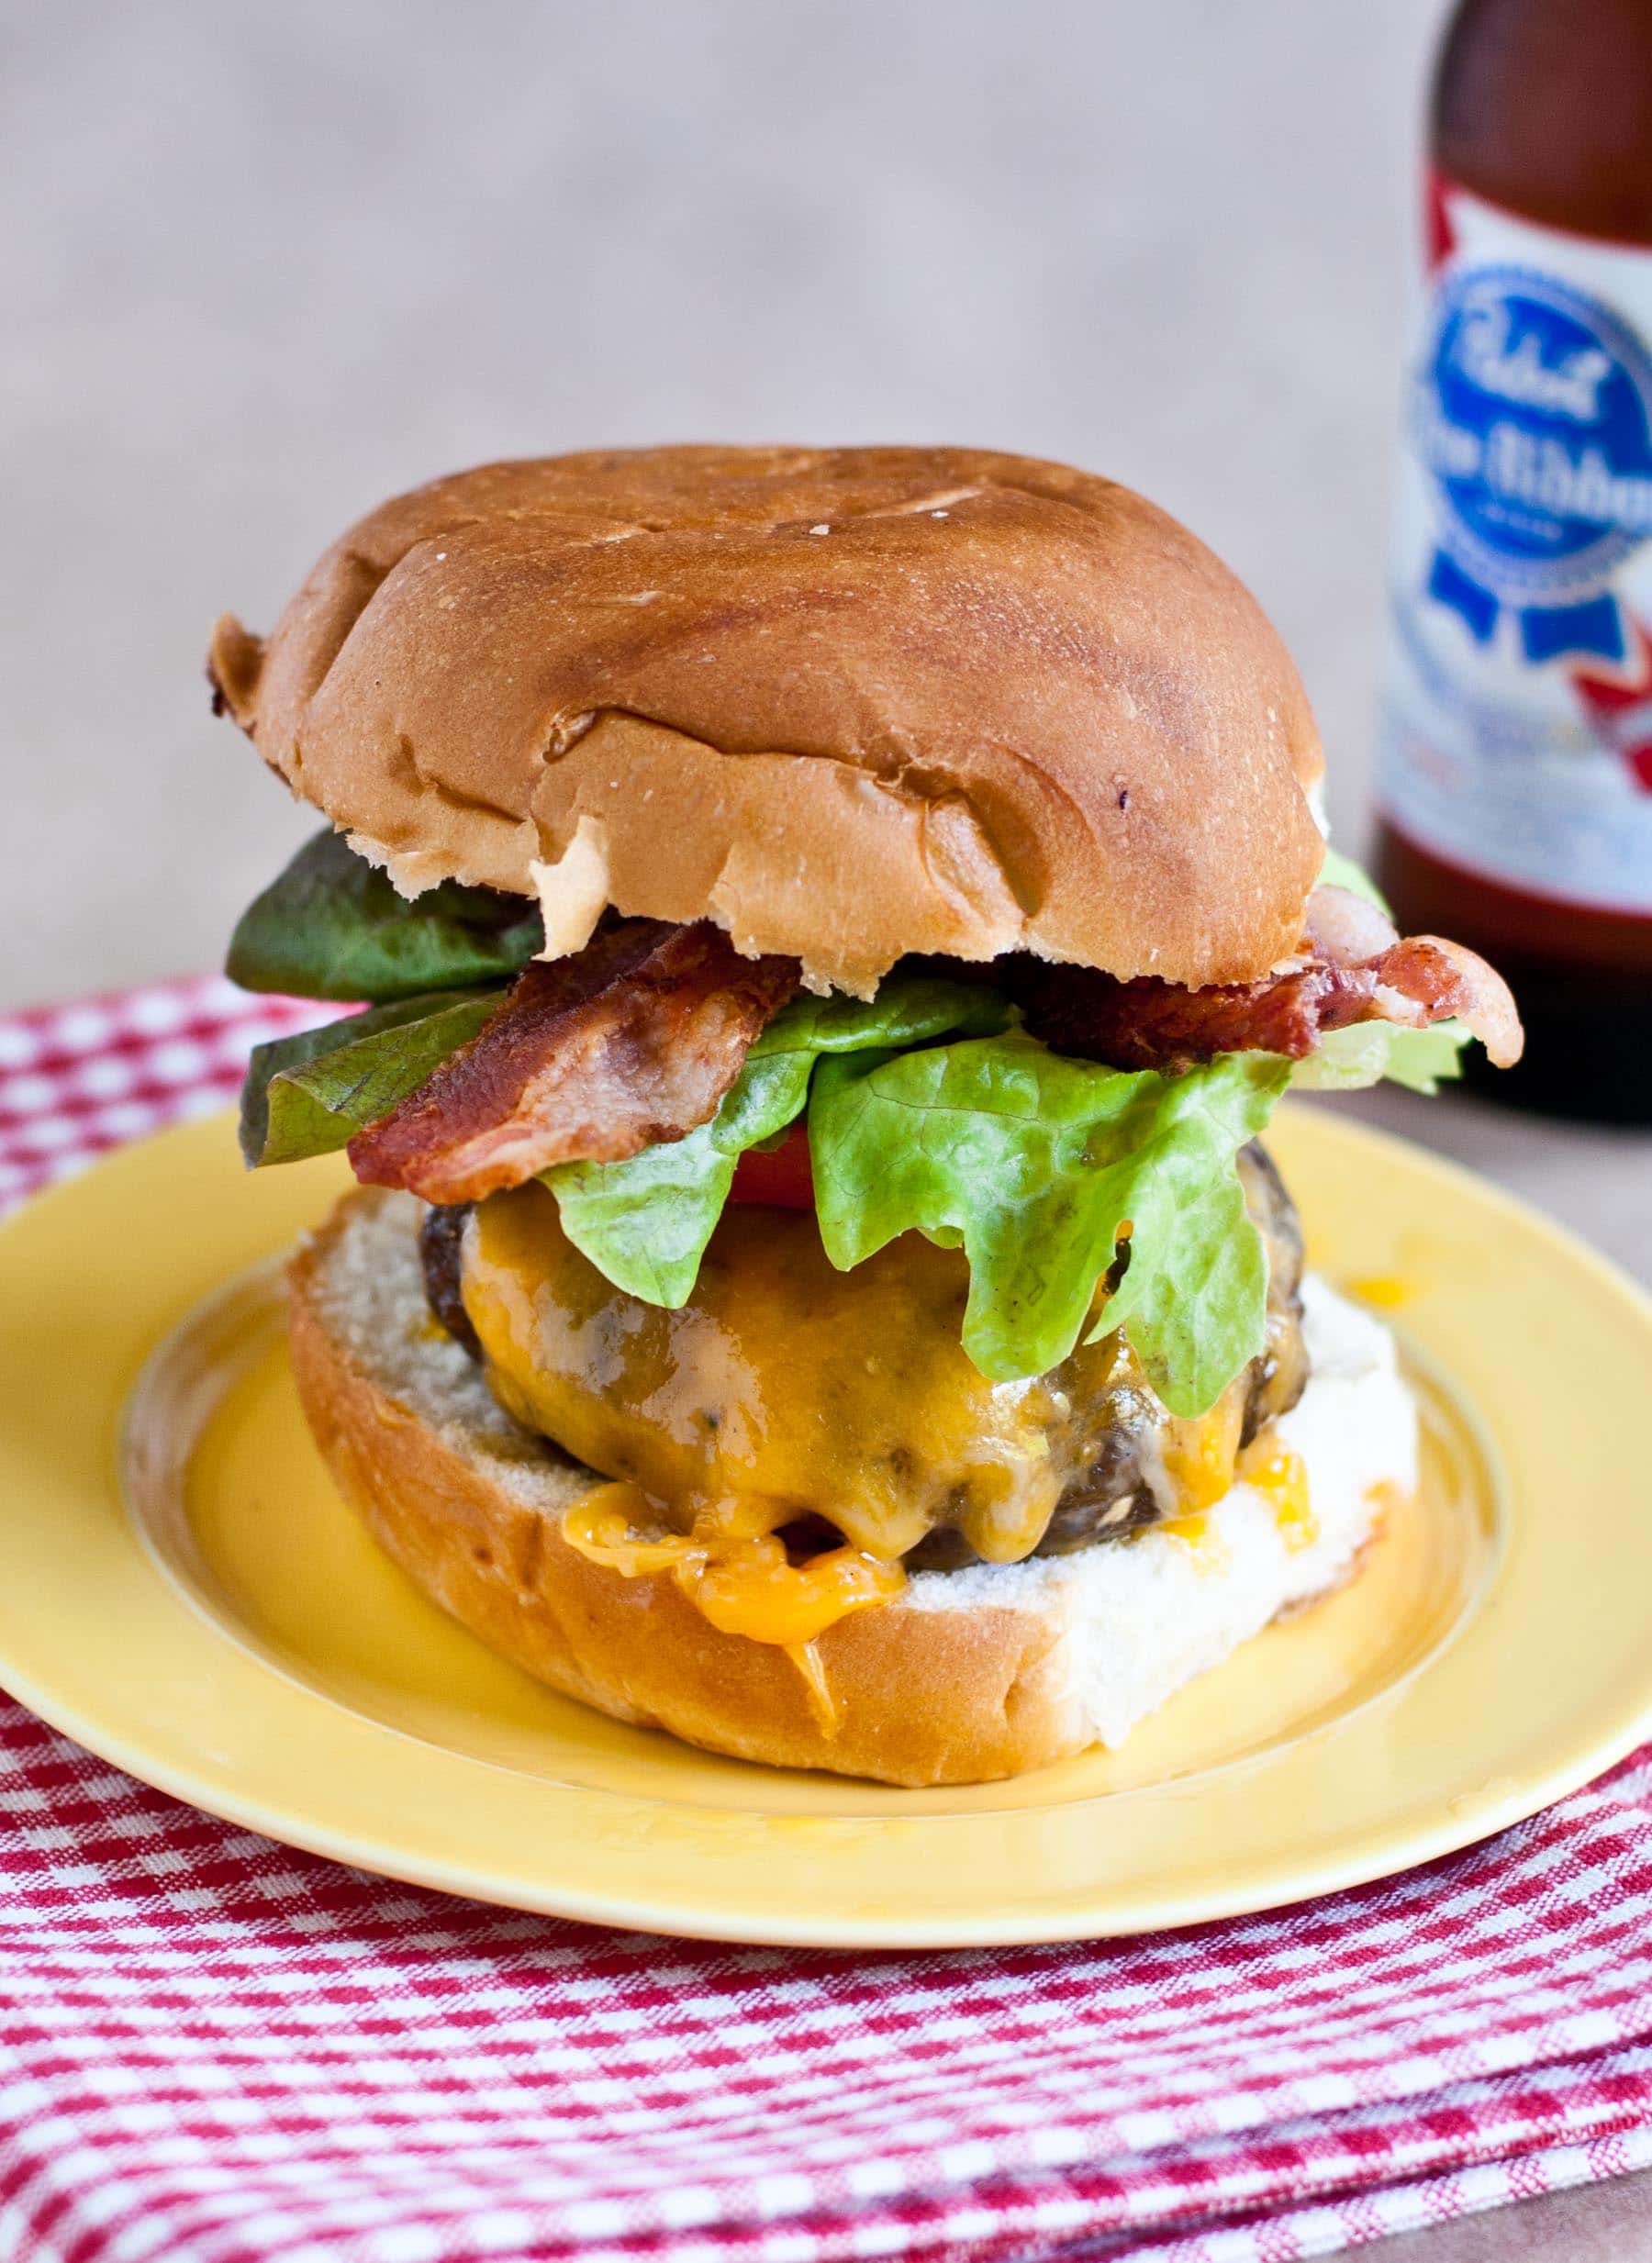 No cookout is complete without these classic Bacon Cheeseburgers!